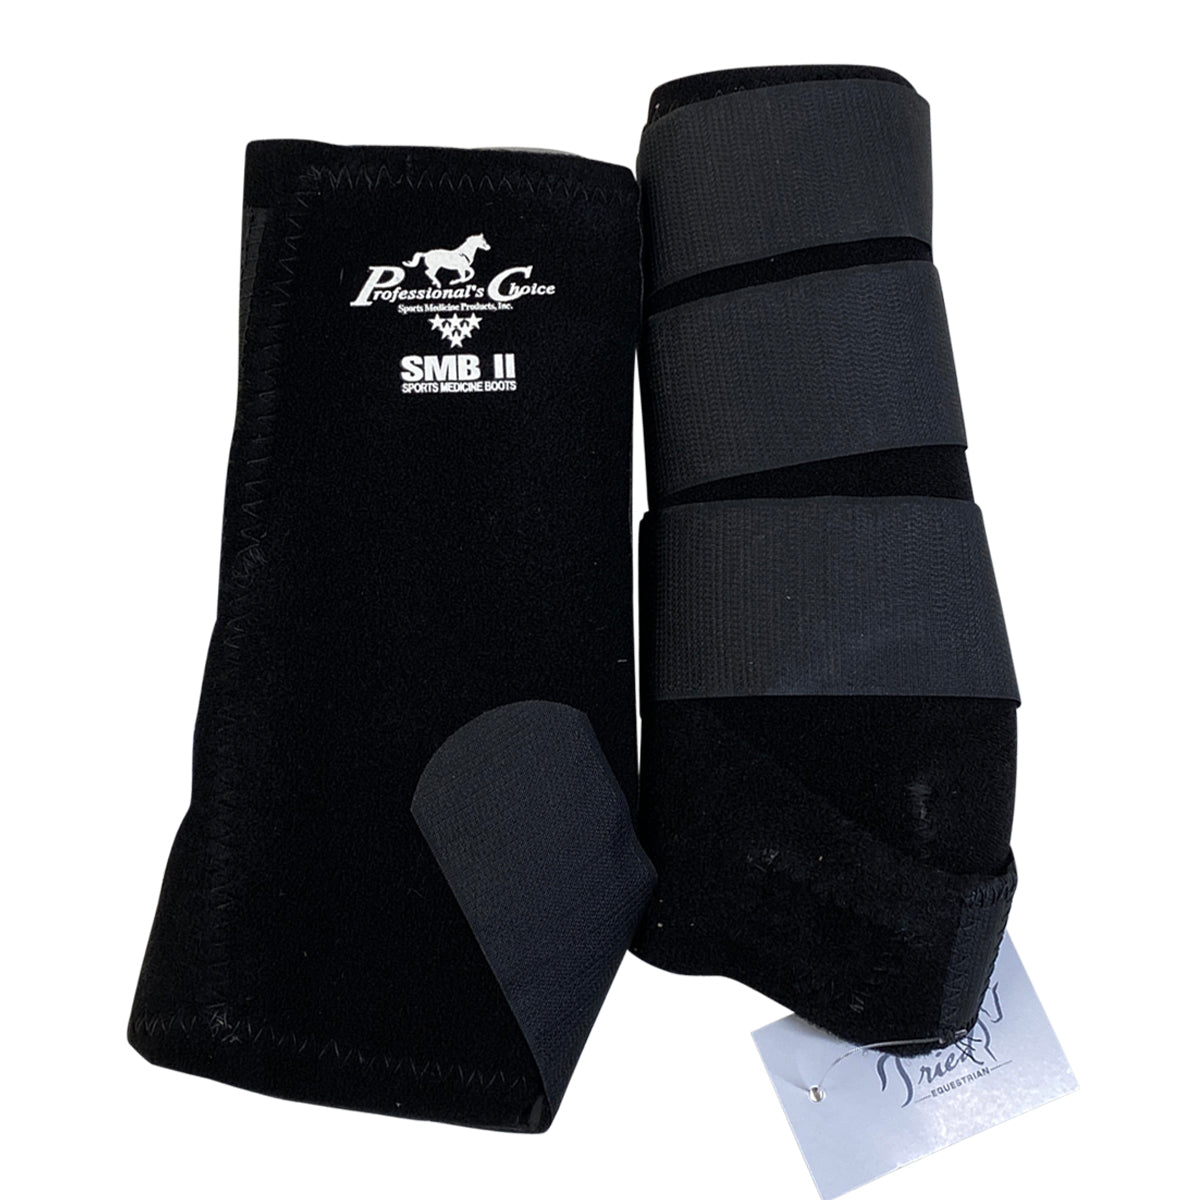 Professional's Choice 'SMBII' Sports Medicine Boots in Black